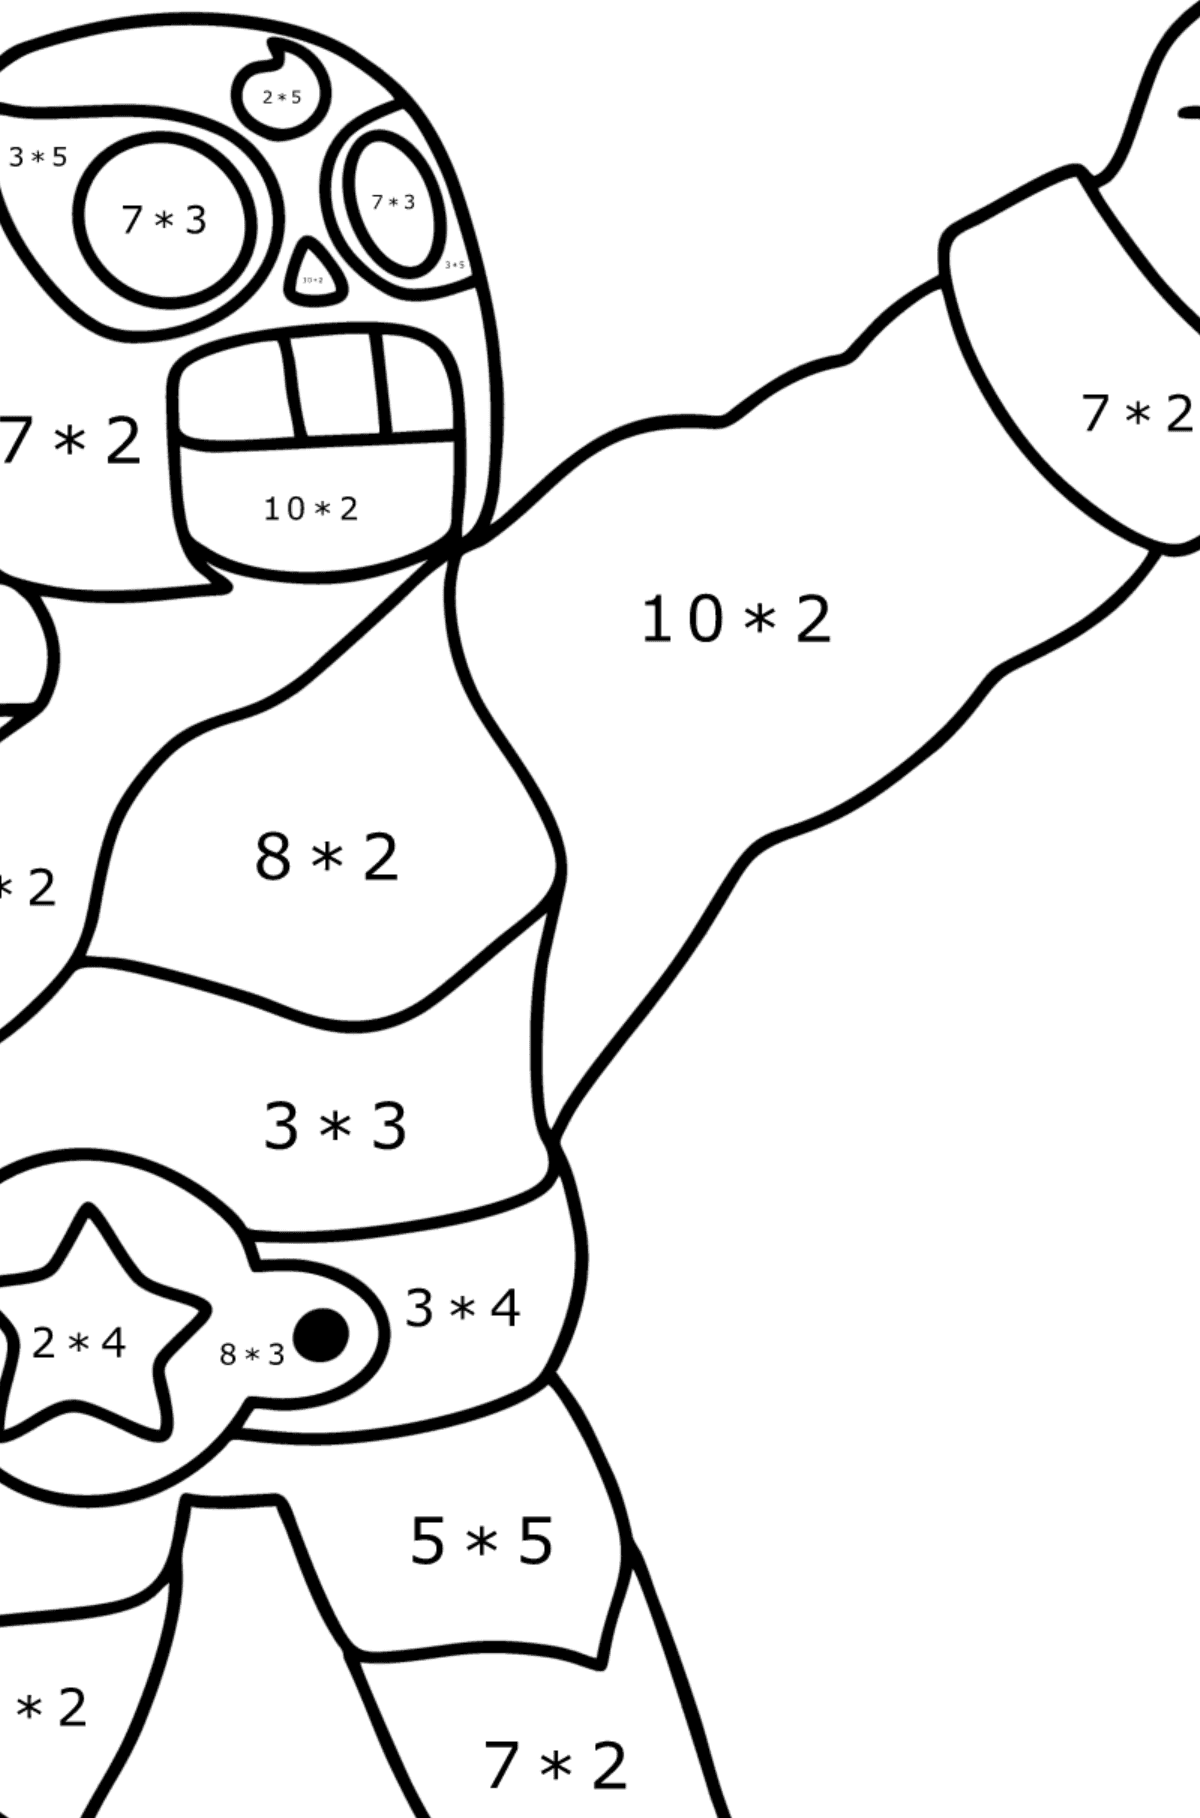 Brawl Stars El Primo coloring page - Math Coloring - Multiplication for Kids